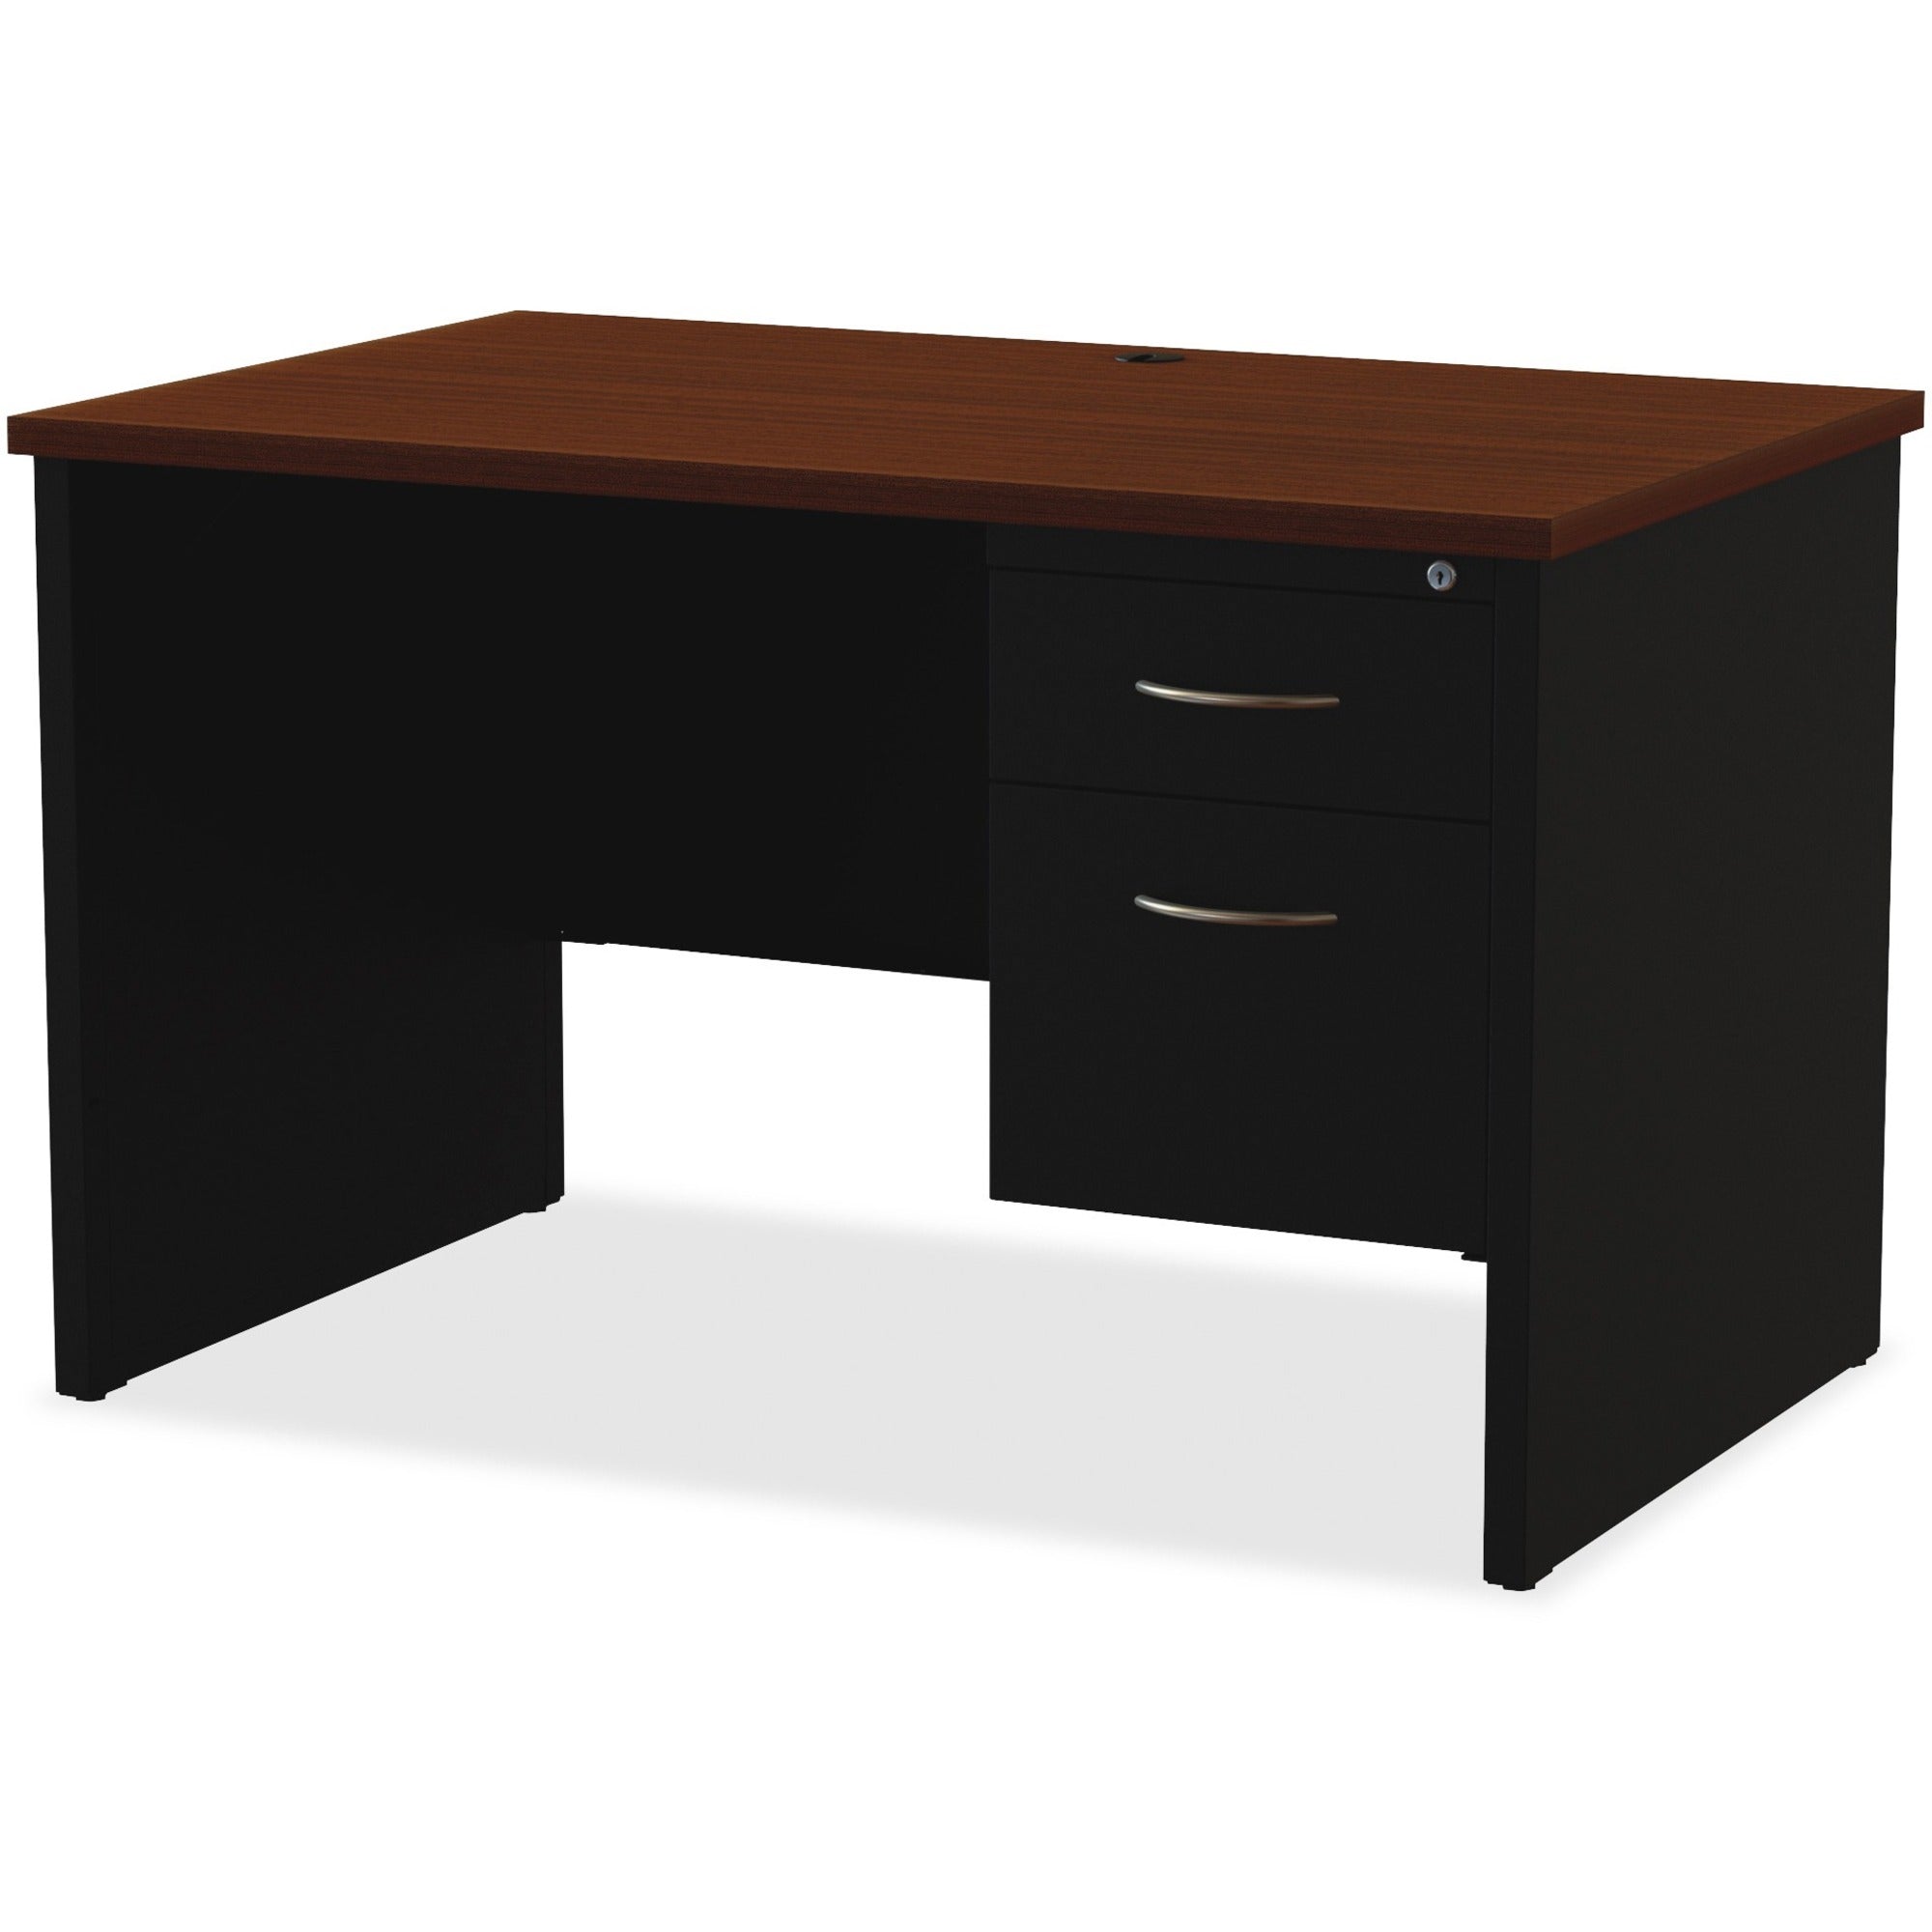 Lorell Fortress Modular Series Right-Pedestal Desk - 48" x 30" , 1.1" Top - 2 x Box, File Drawer(s) - Single Pedestal on Right Side - Material: Steel - Finish: Walnut Laminate, Black - Scratch Resistant, Stain Resistant, Ball-bearing Suspension, Grom - 